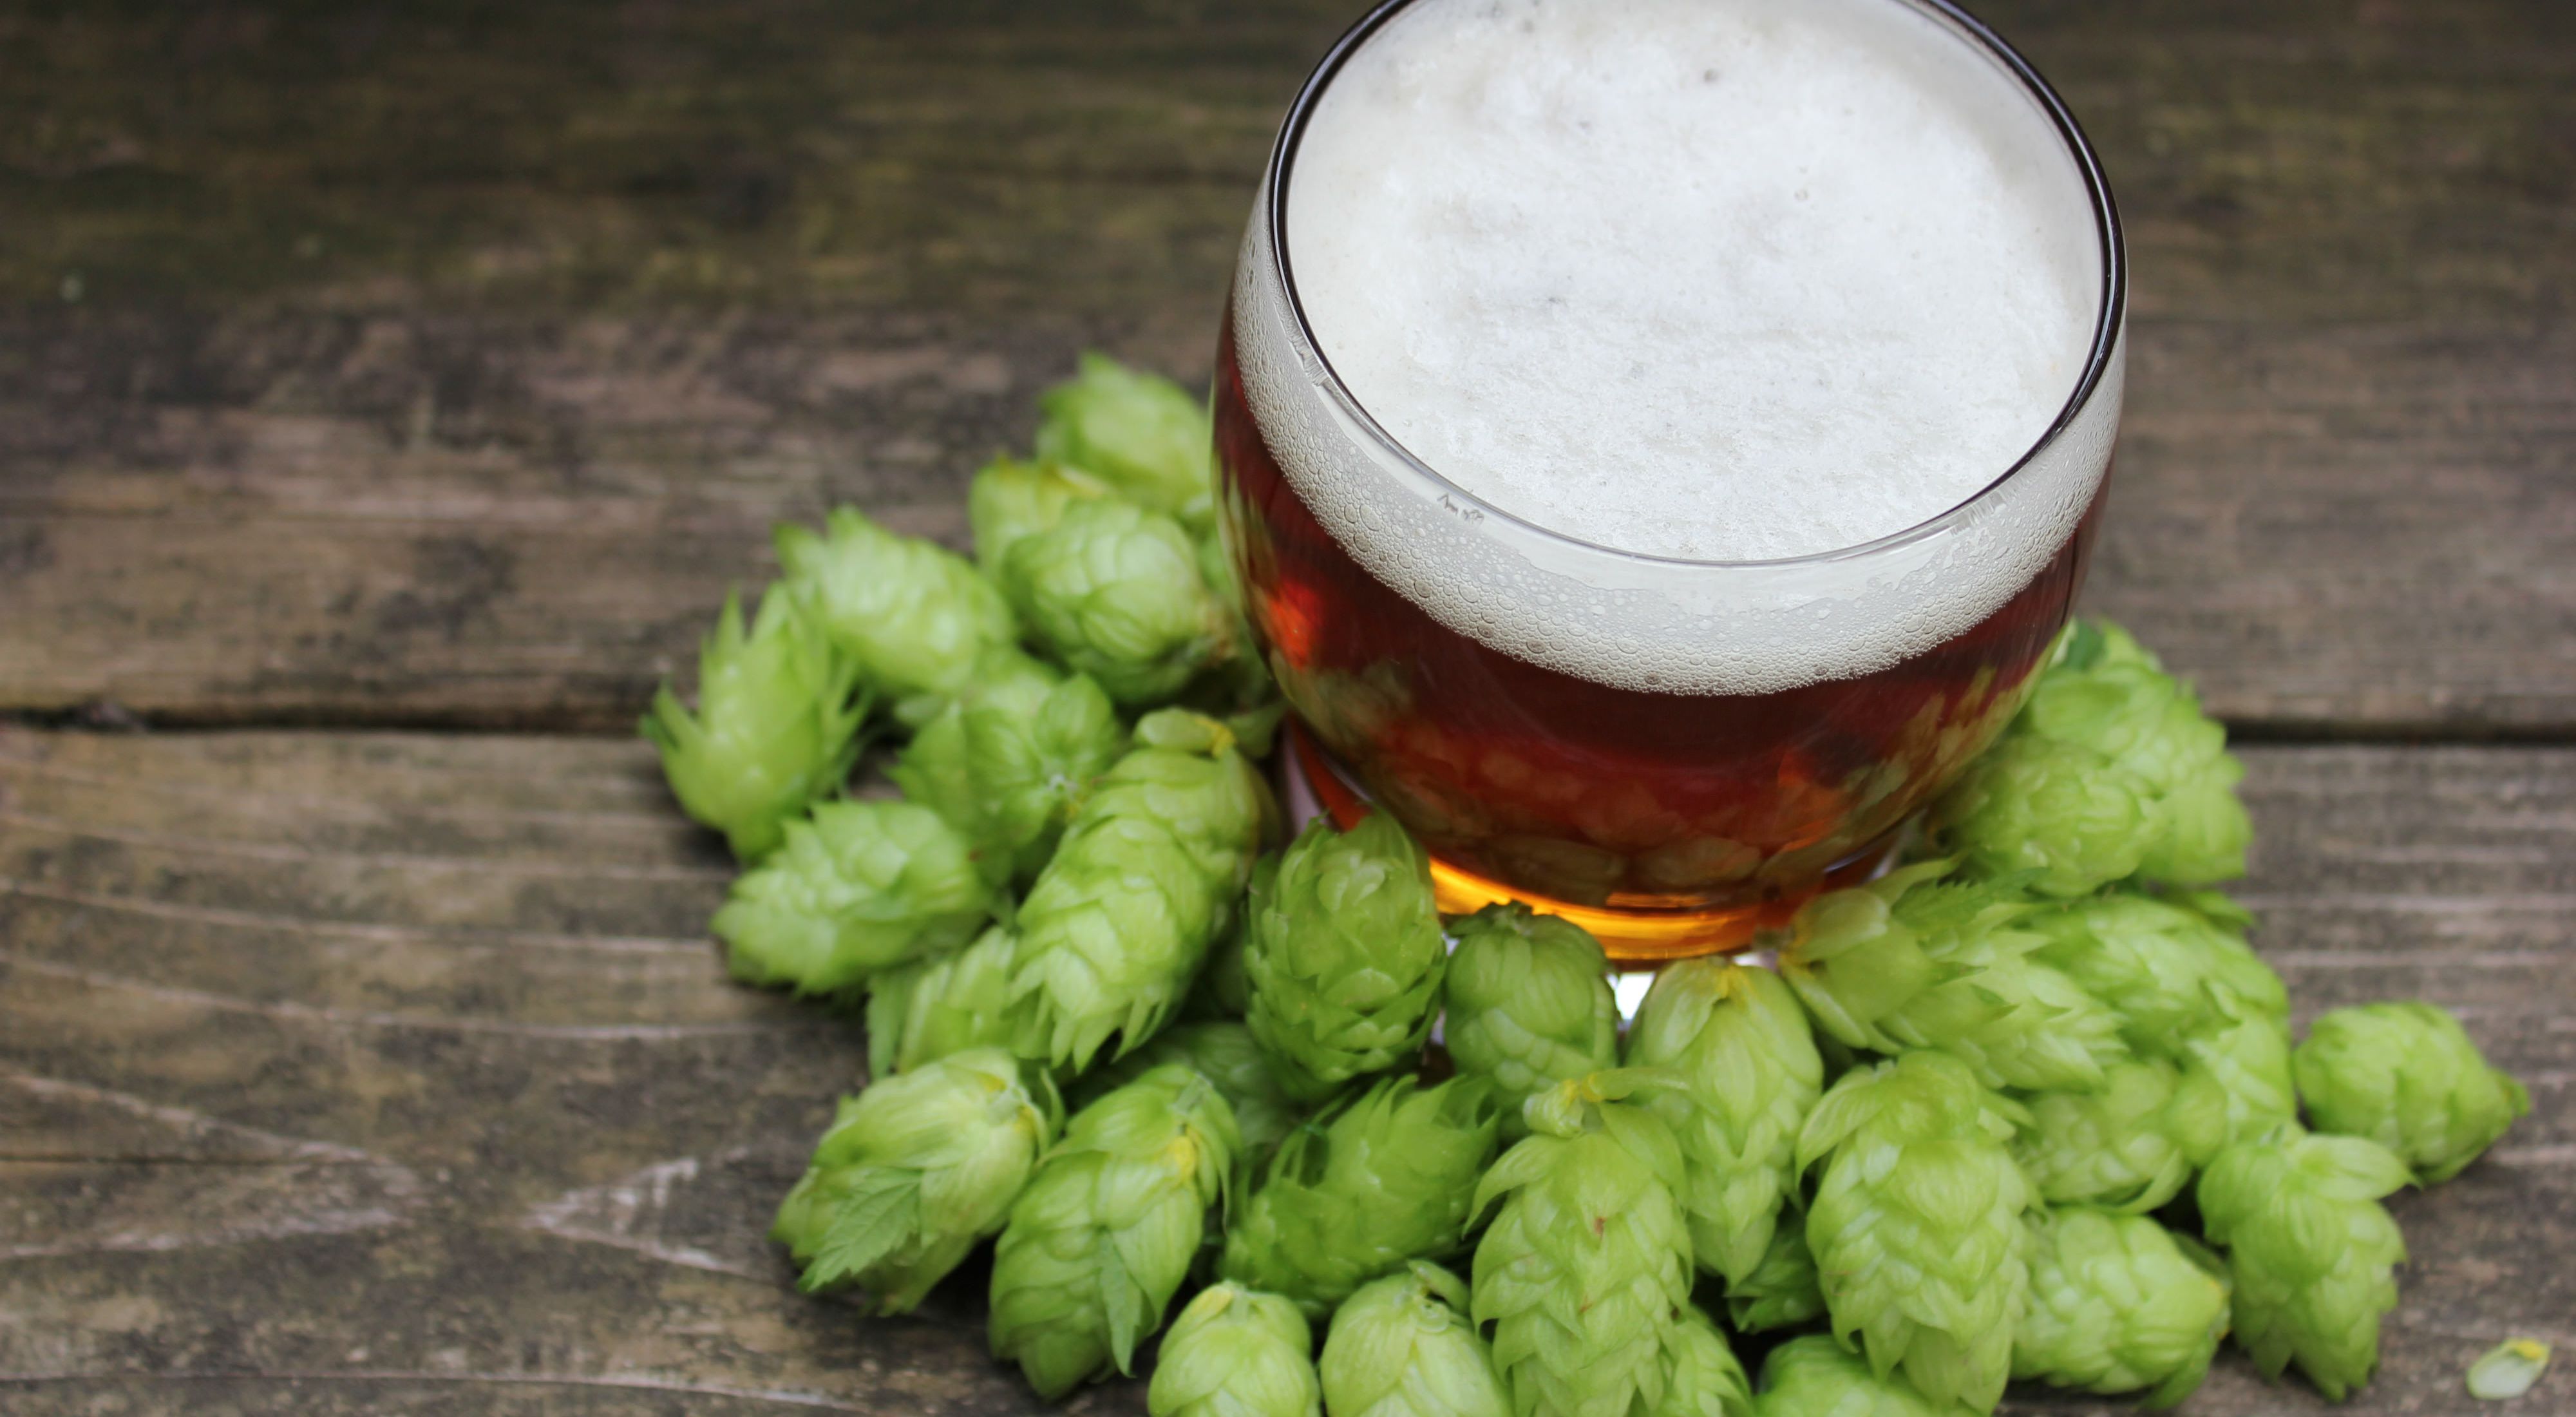 Hops are part of the picture. Water is 95 percent of beer's ingredients.